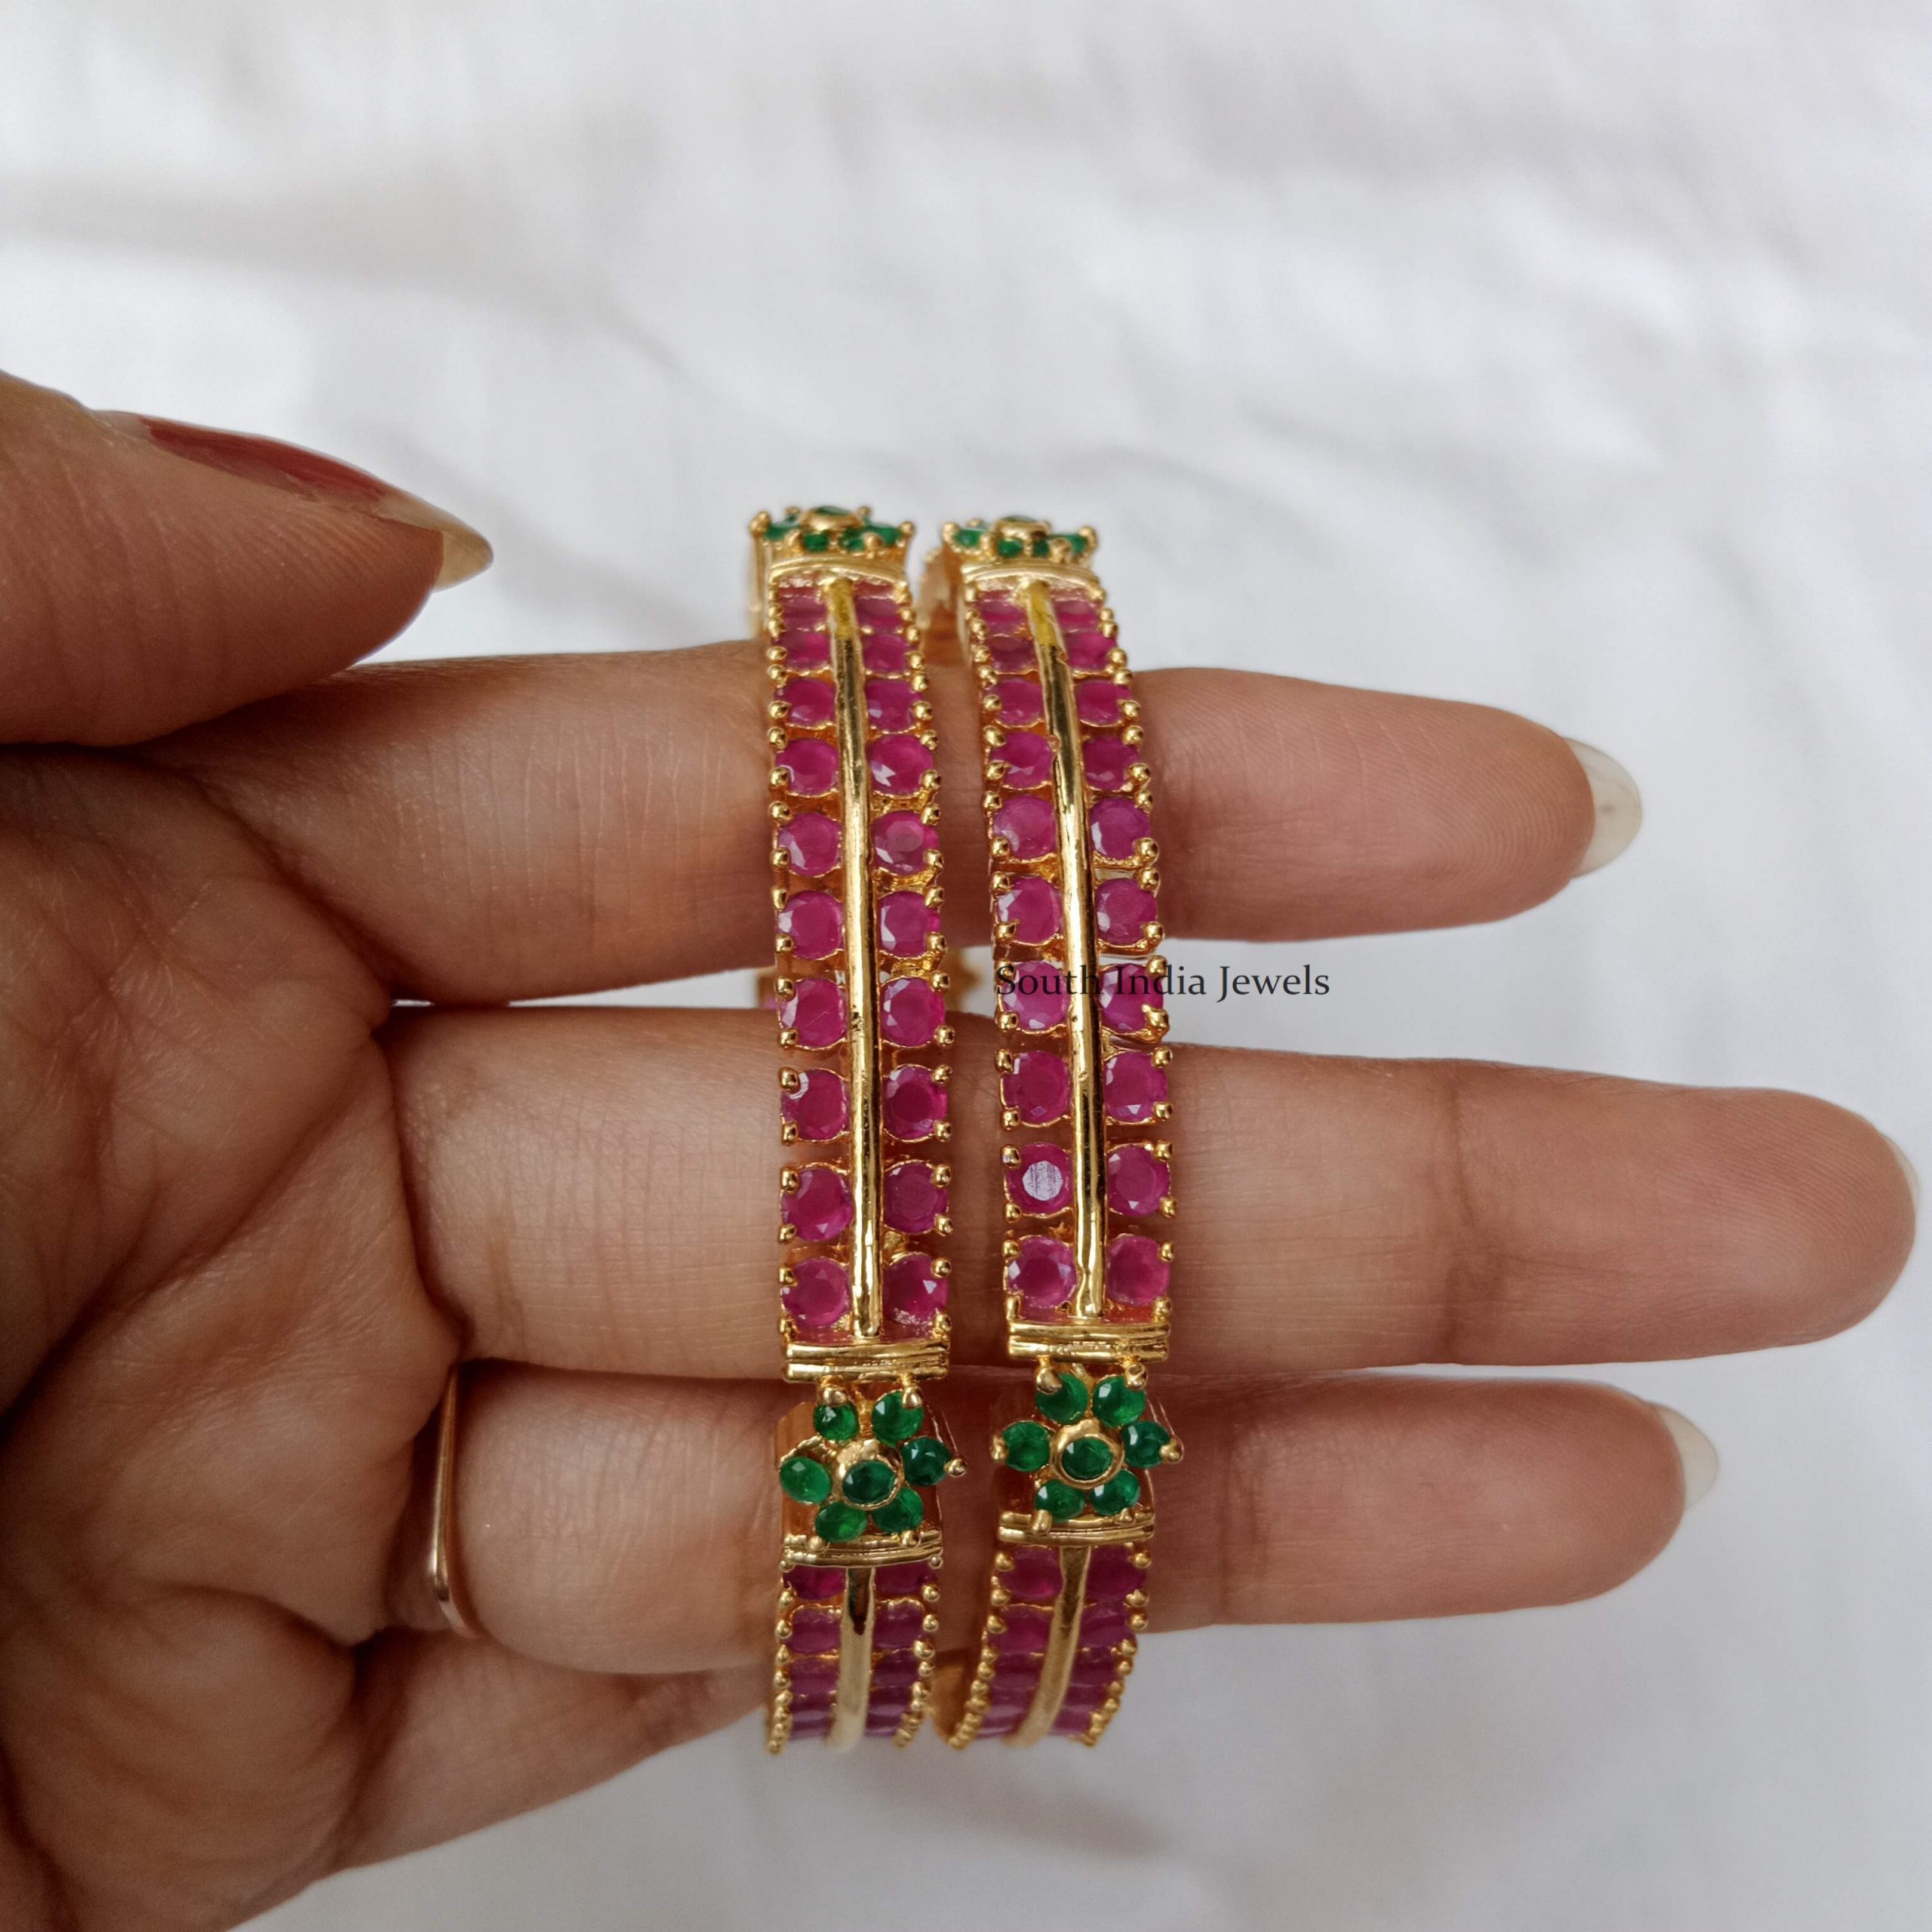 One gram gold bangles designs ruby and emerald stone model 28 size   Swarnakshi Jewelry